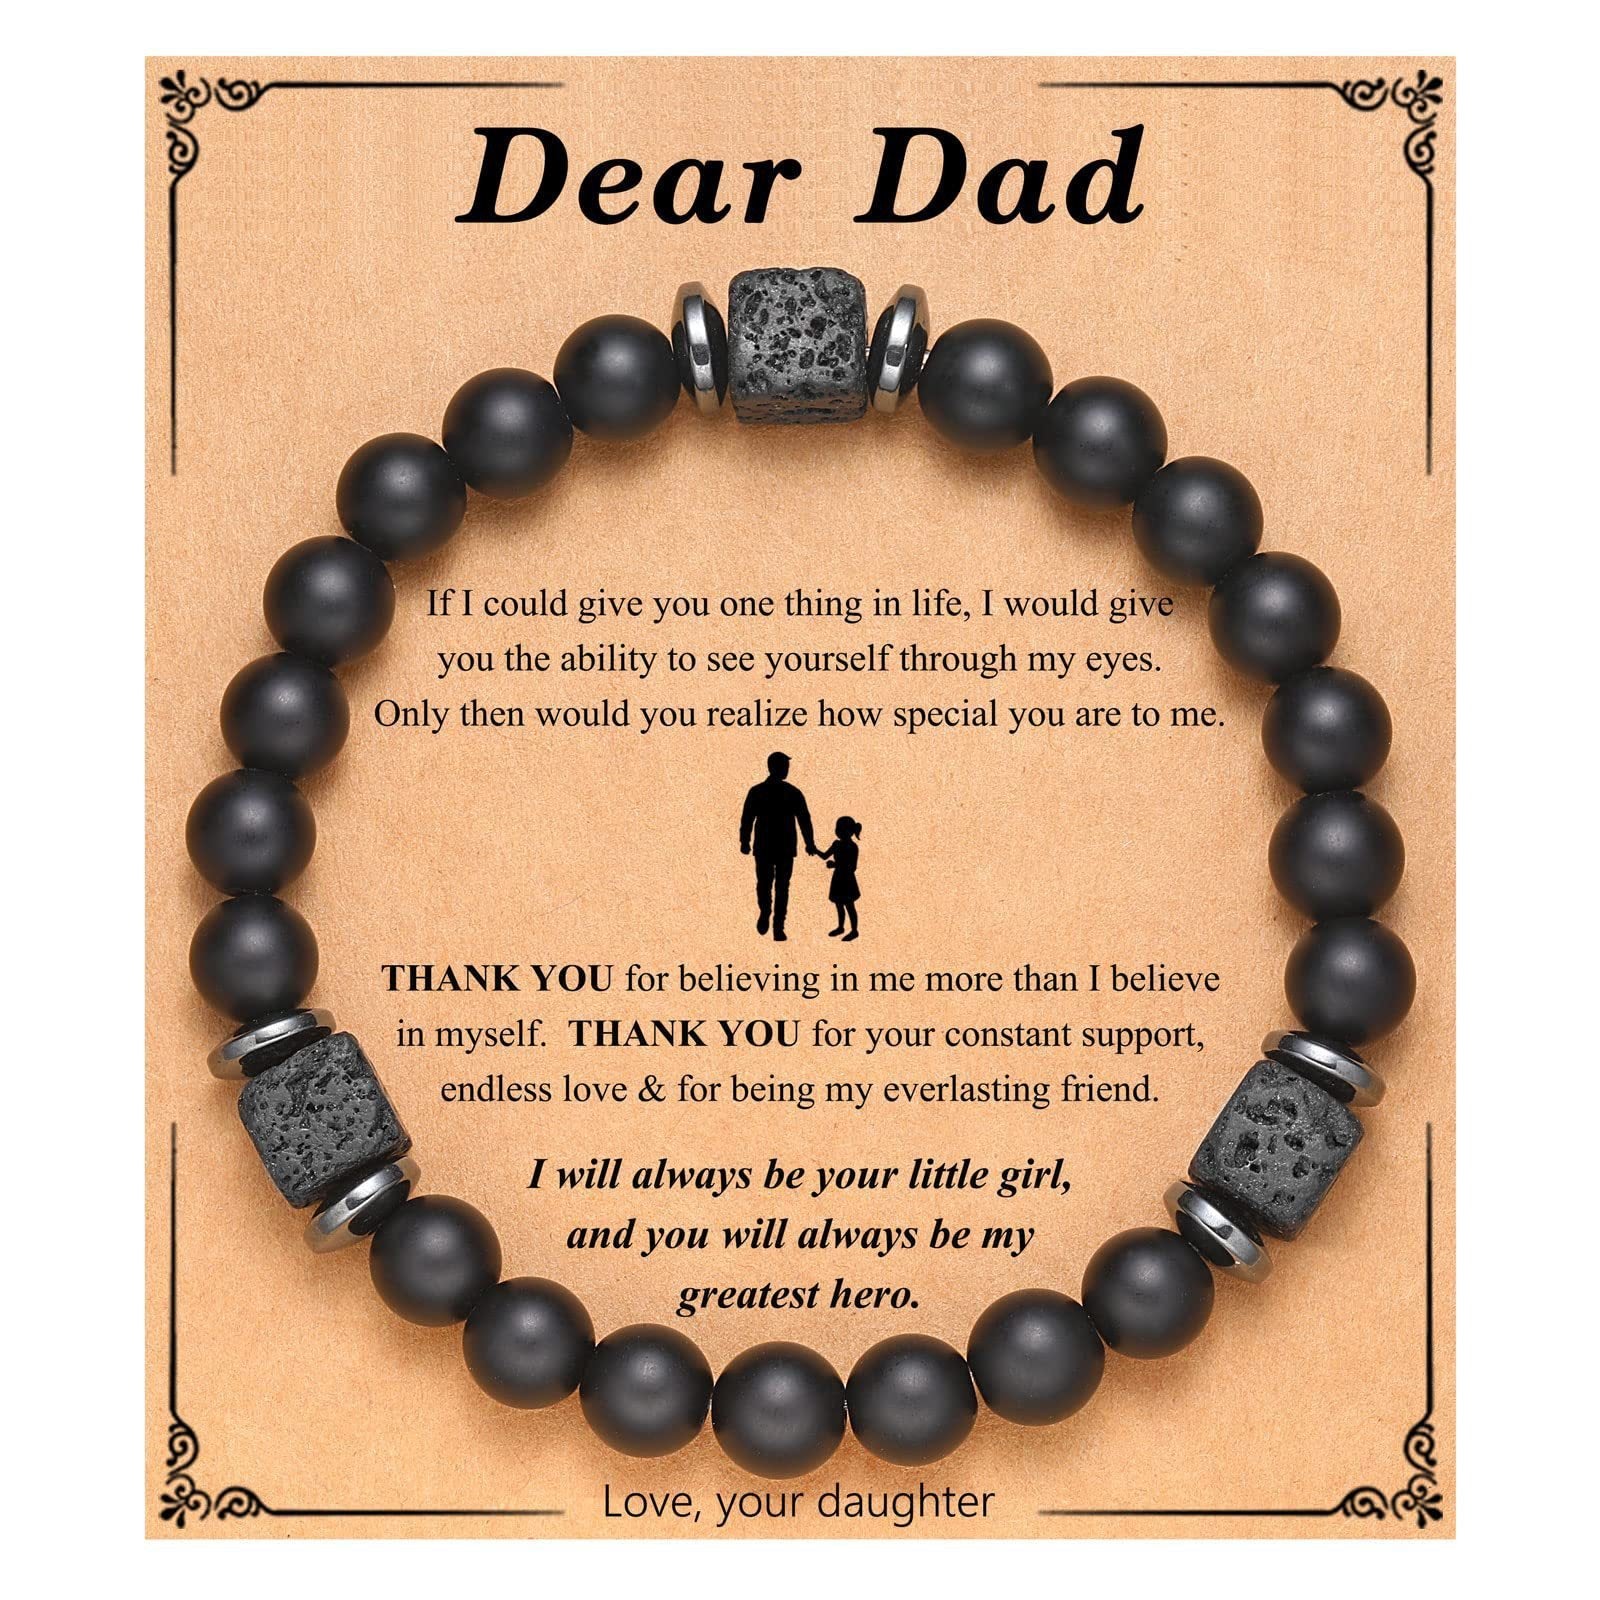 Black Frosted Square Volcanic Stone Father's Day Gift Bracelet